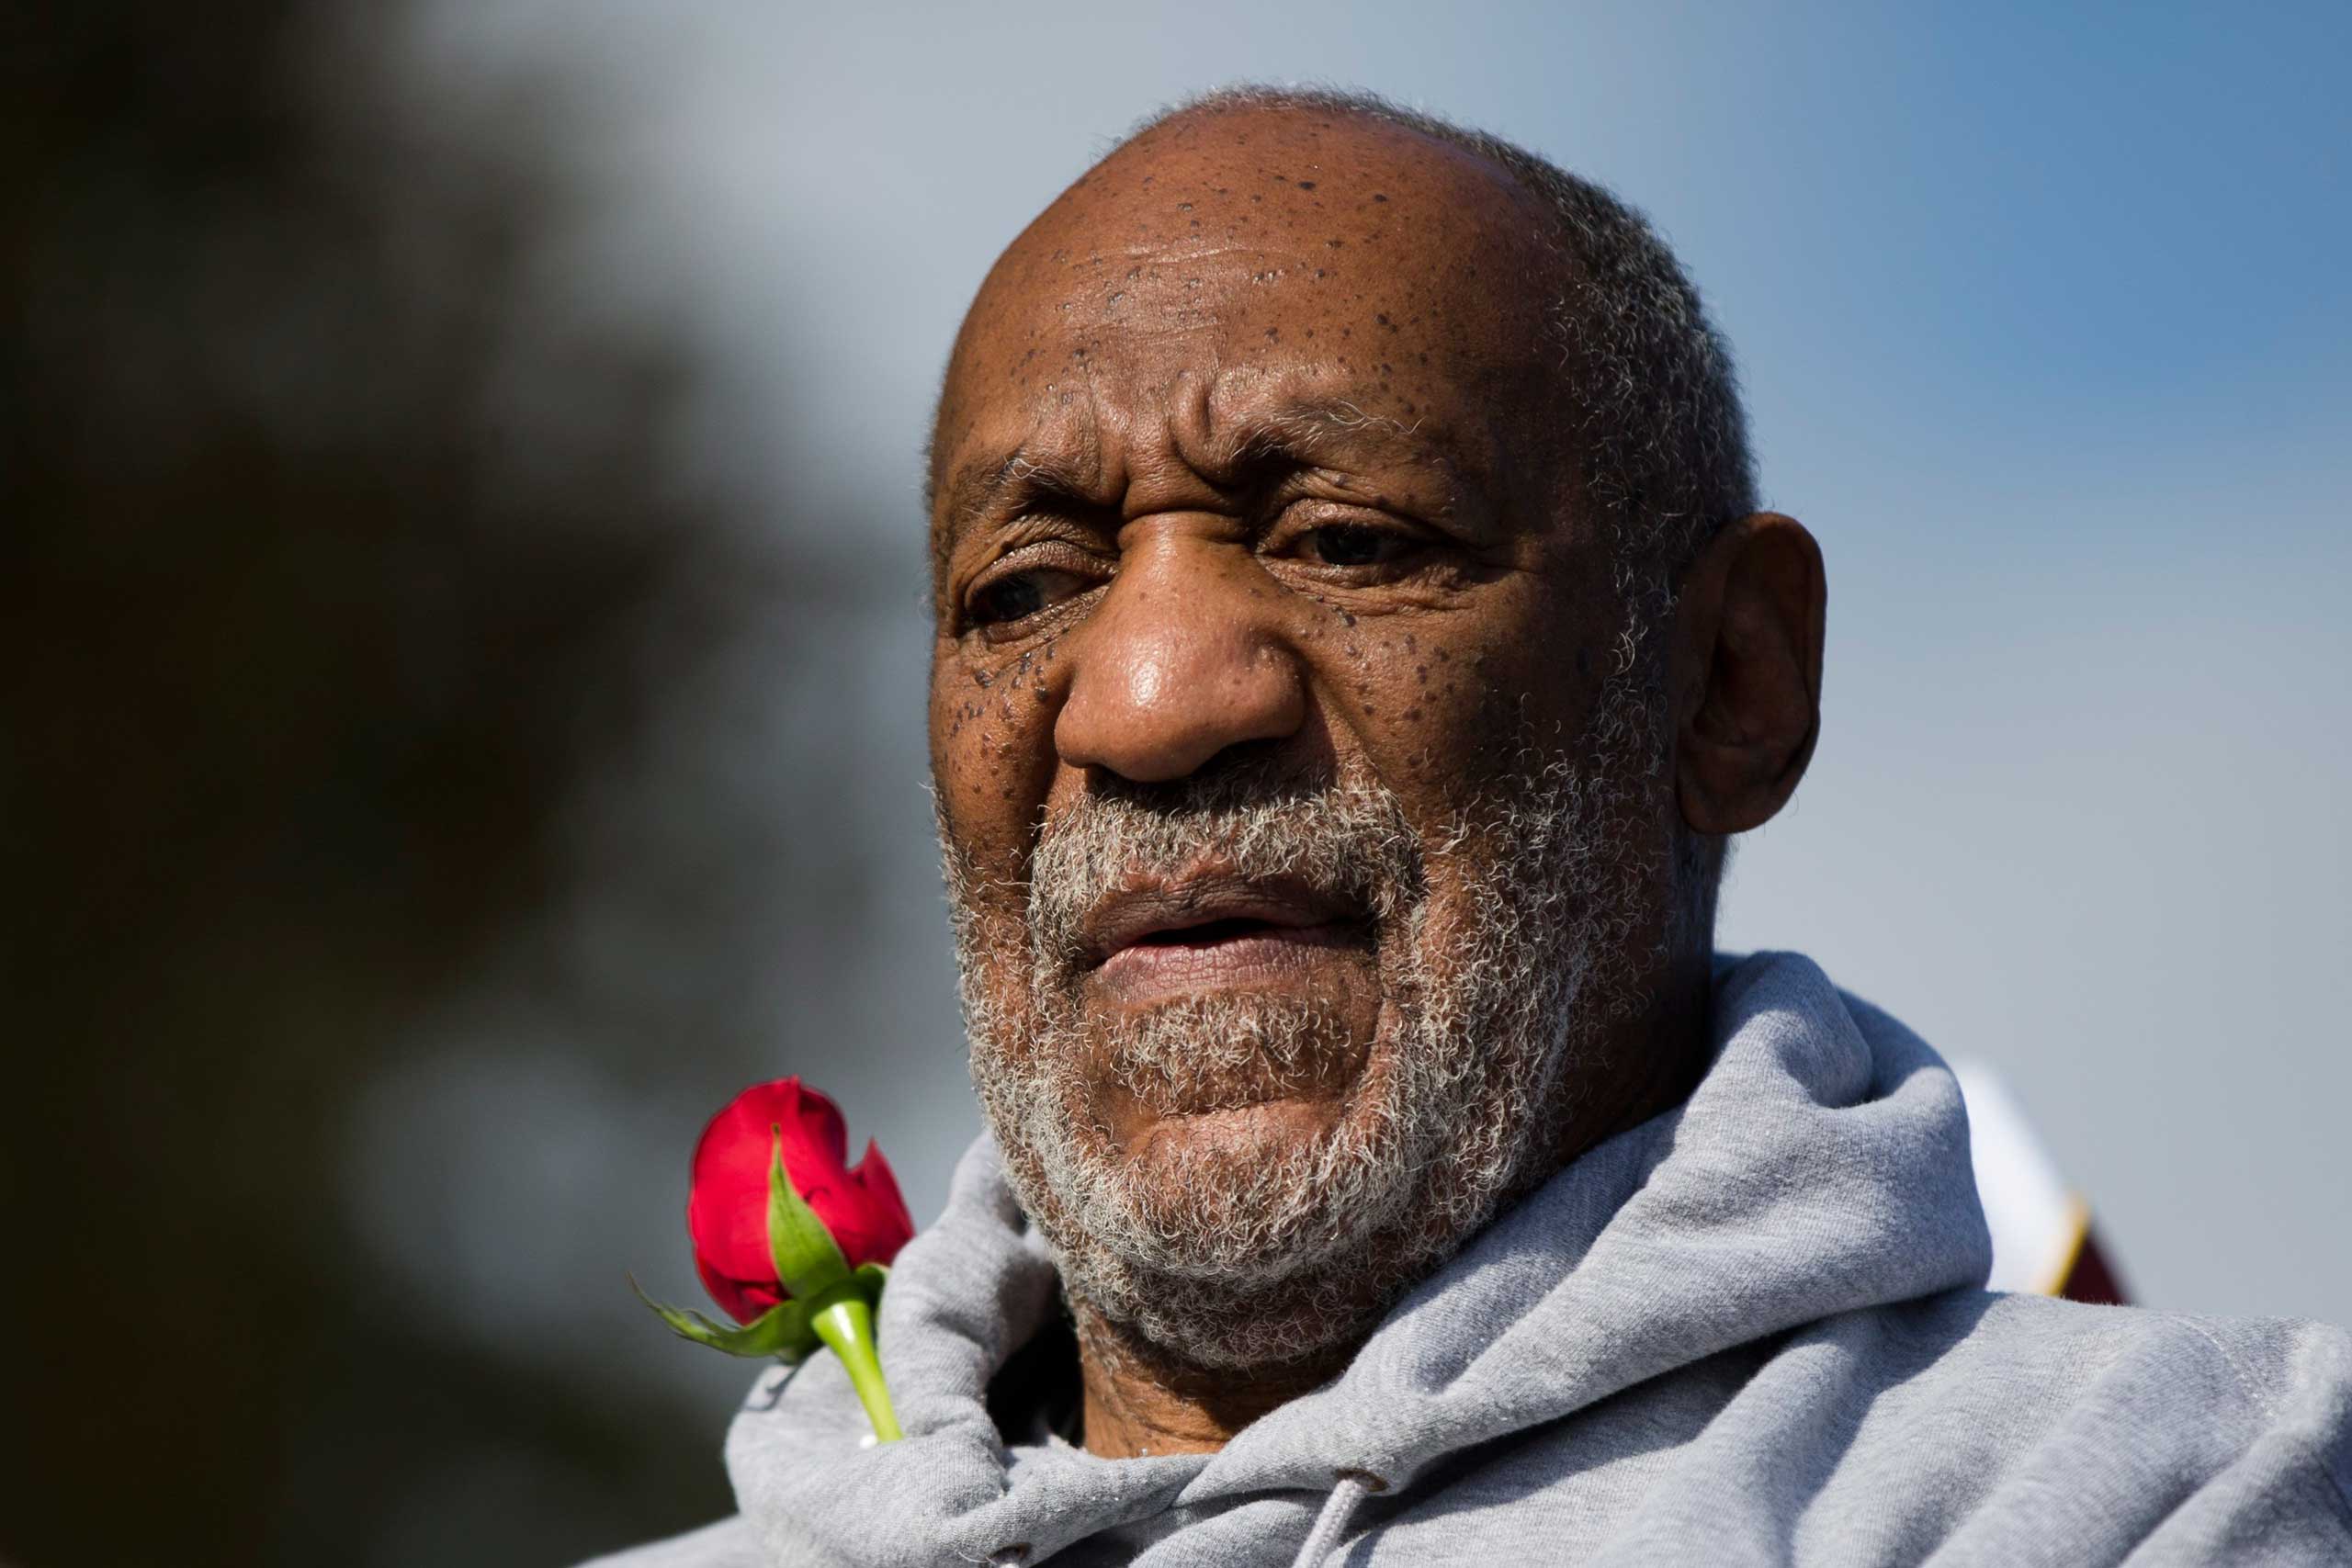 Entertainer and Navy veteran Bill Cosby at a Veterans Day ceremony, Nov. 11, 2014, at the The All Wars Memorial to Colored Soldiers and Sailors in Philadelphia. (Matt Rourke—AP)